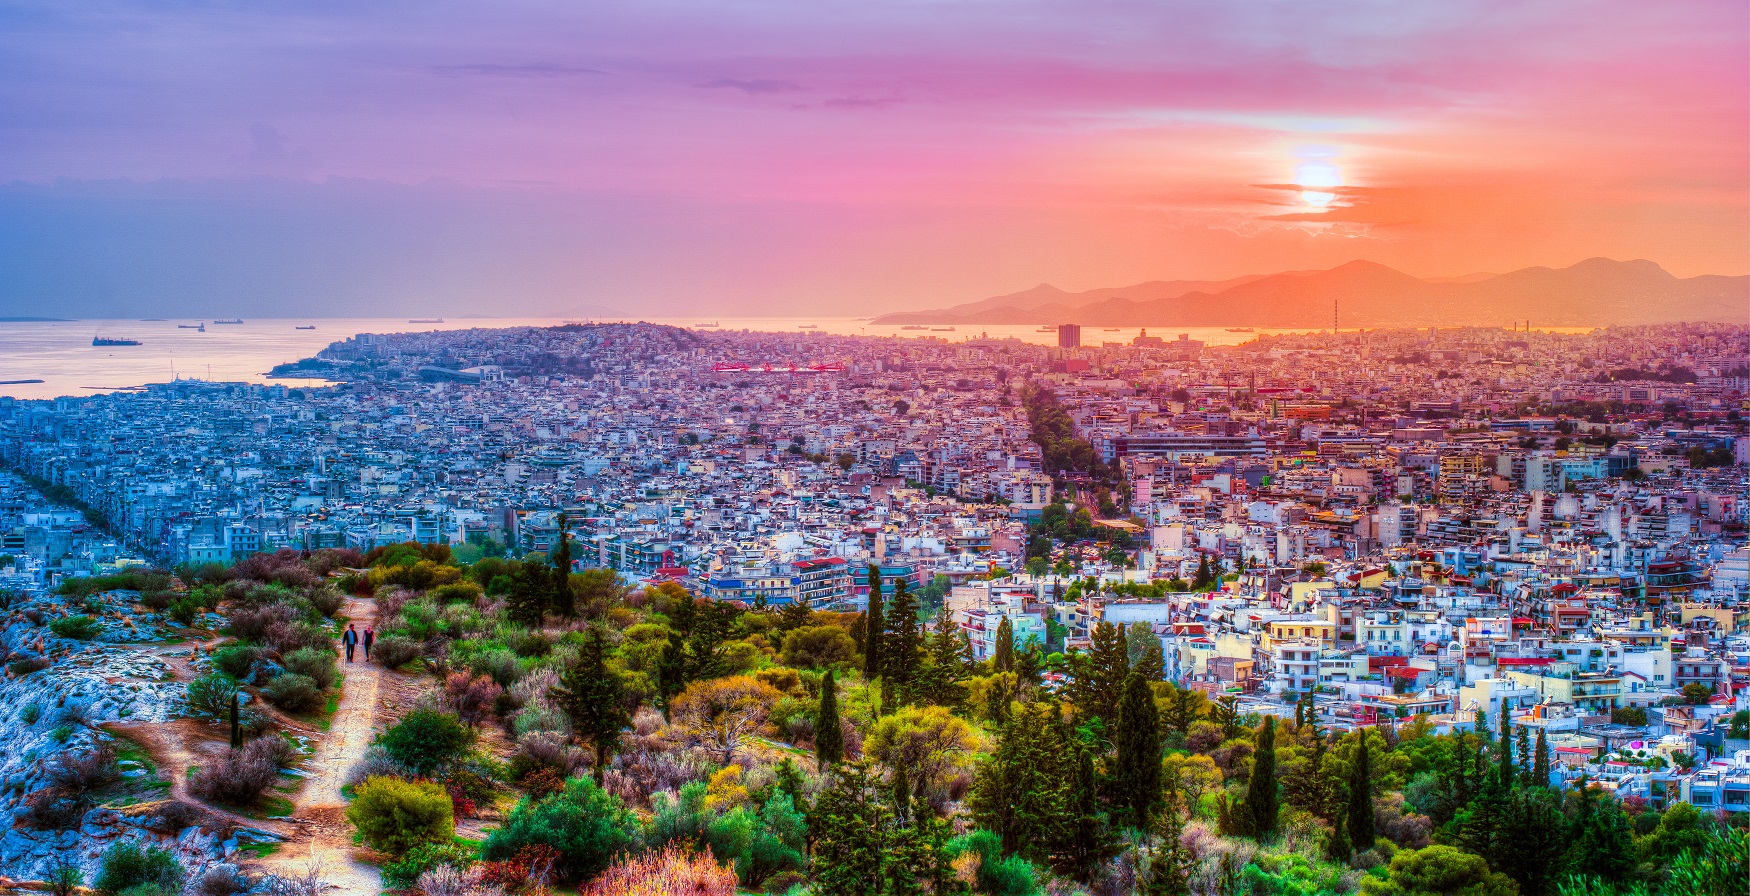 REM Real Estate Management to use Recognyte for Real Estate Data in Greece